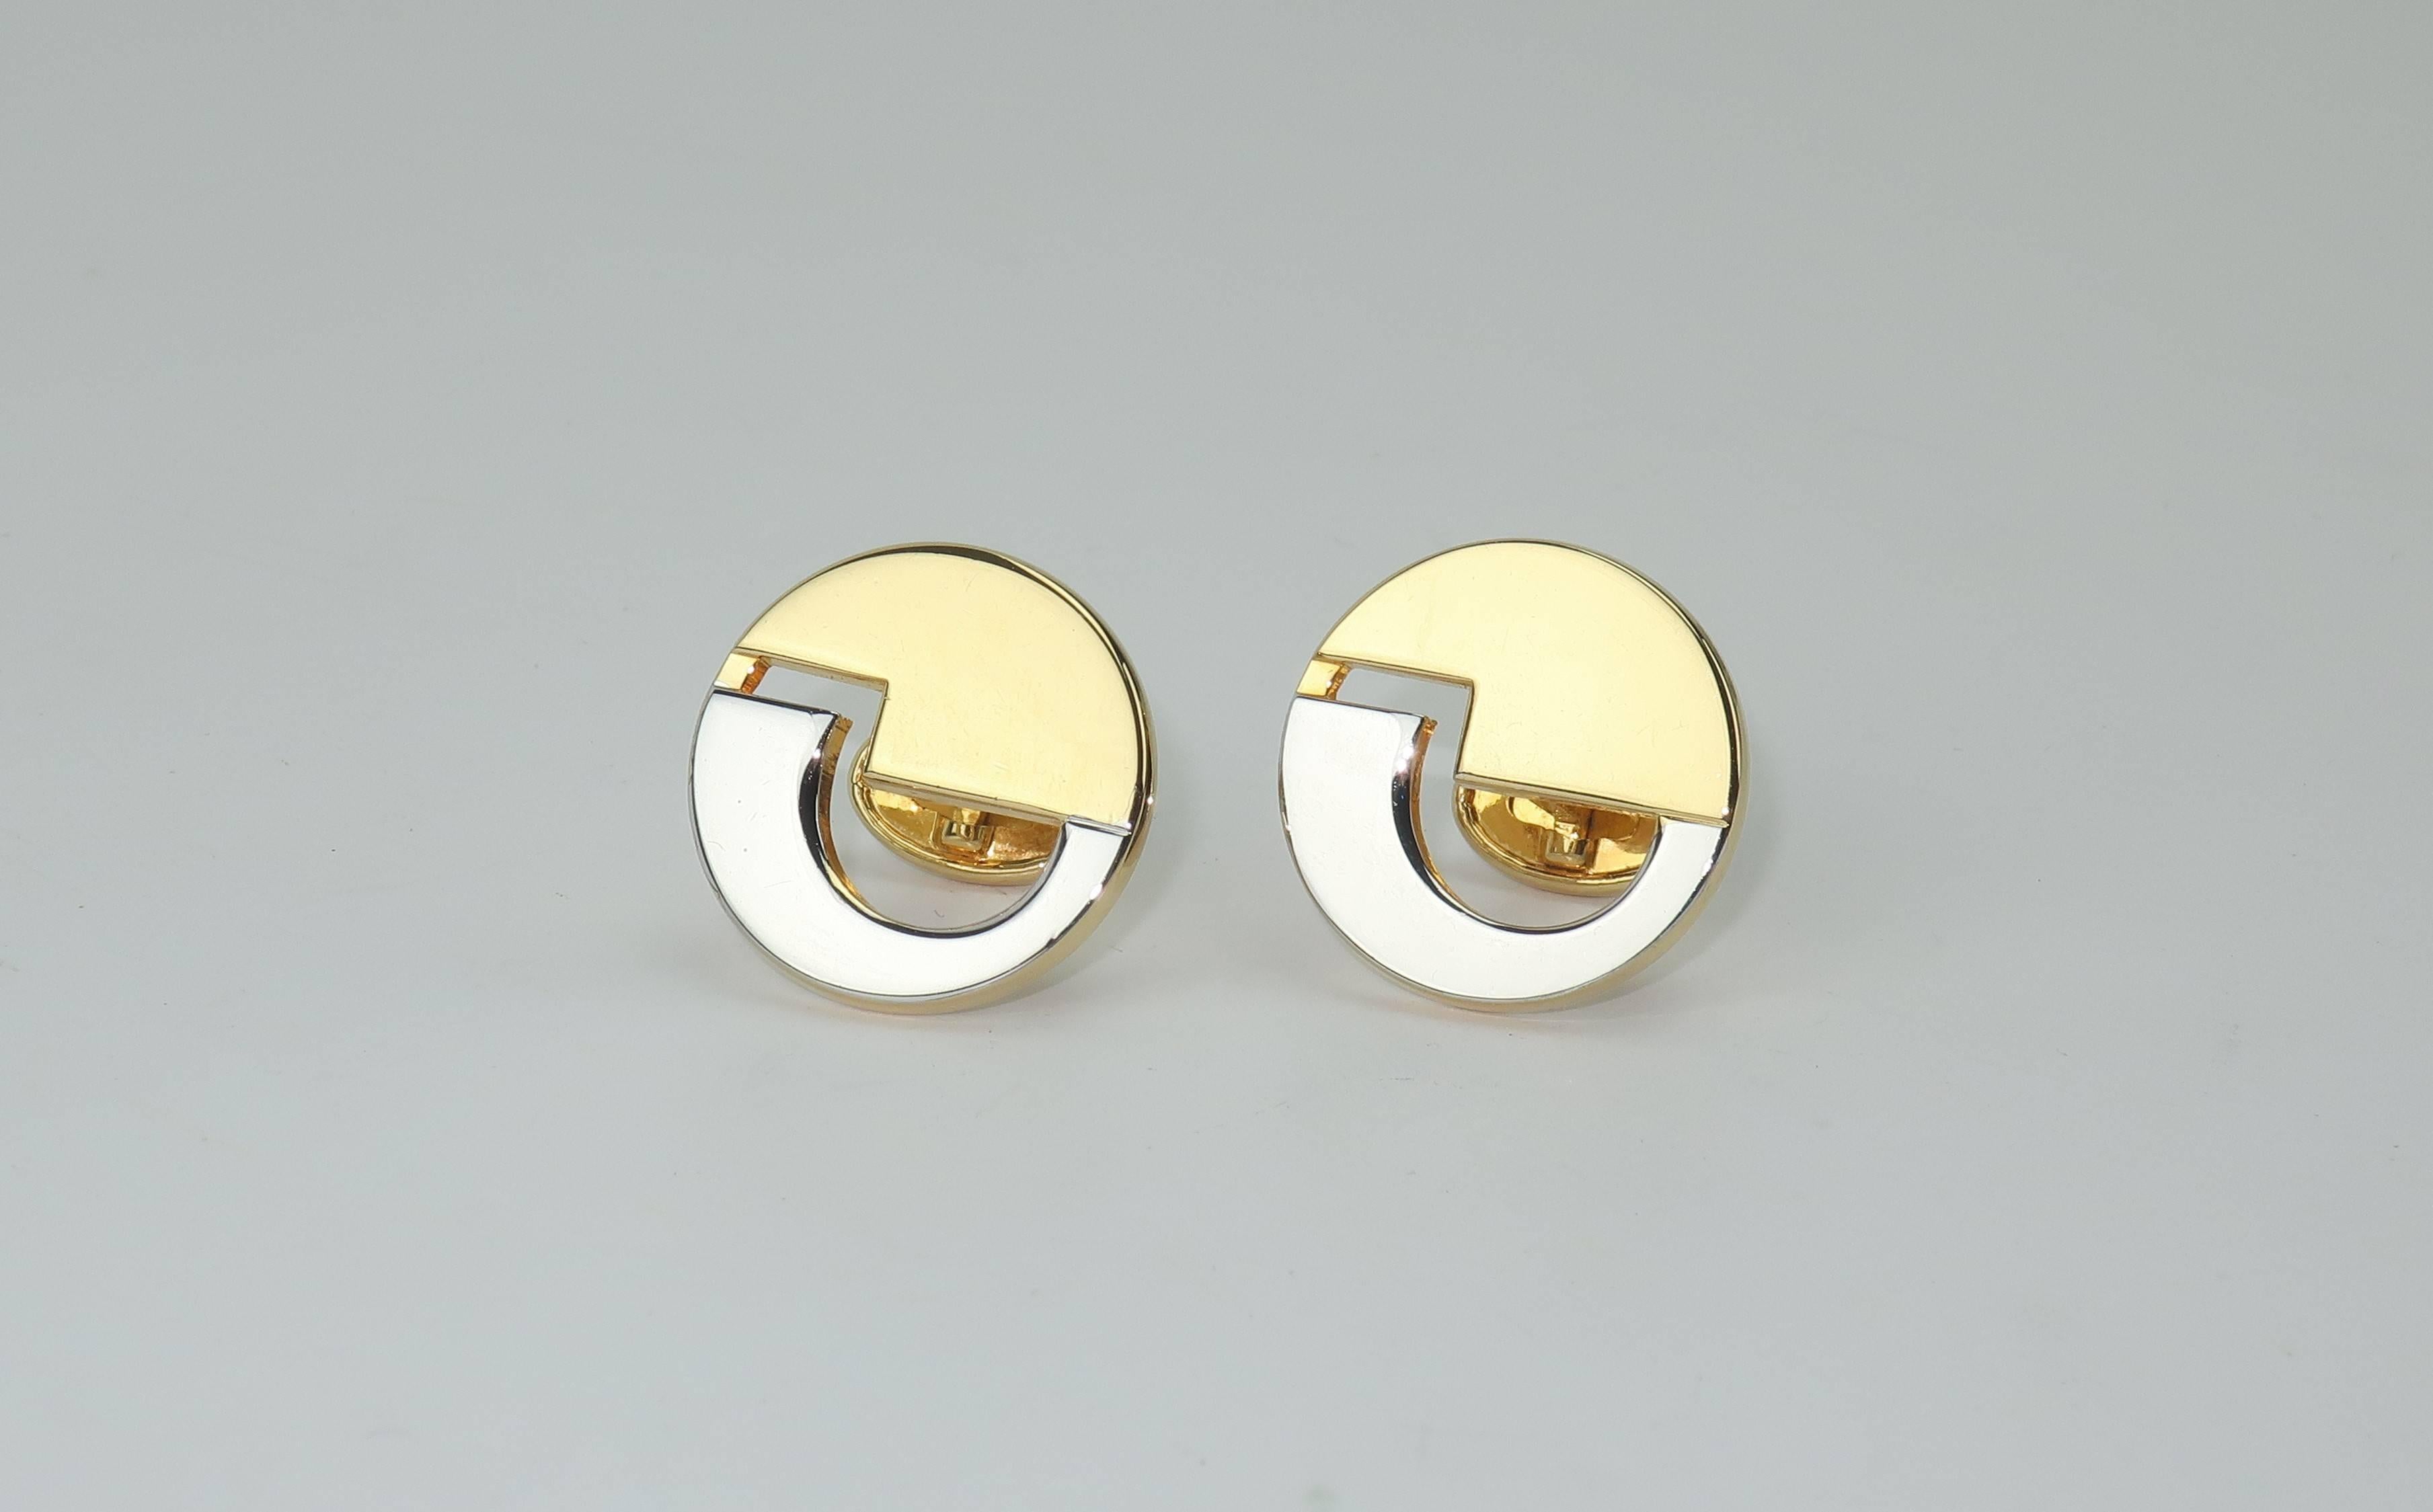 Pierre Cardin's space age designs from the 1960's and 1970’s are the epitome of the mod and futuristic vision of the time.  These two-tone gold and silver cufflinks combine futurism with classic polished style.  The abstract modernist logo design